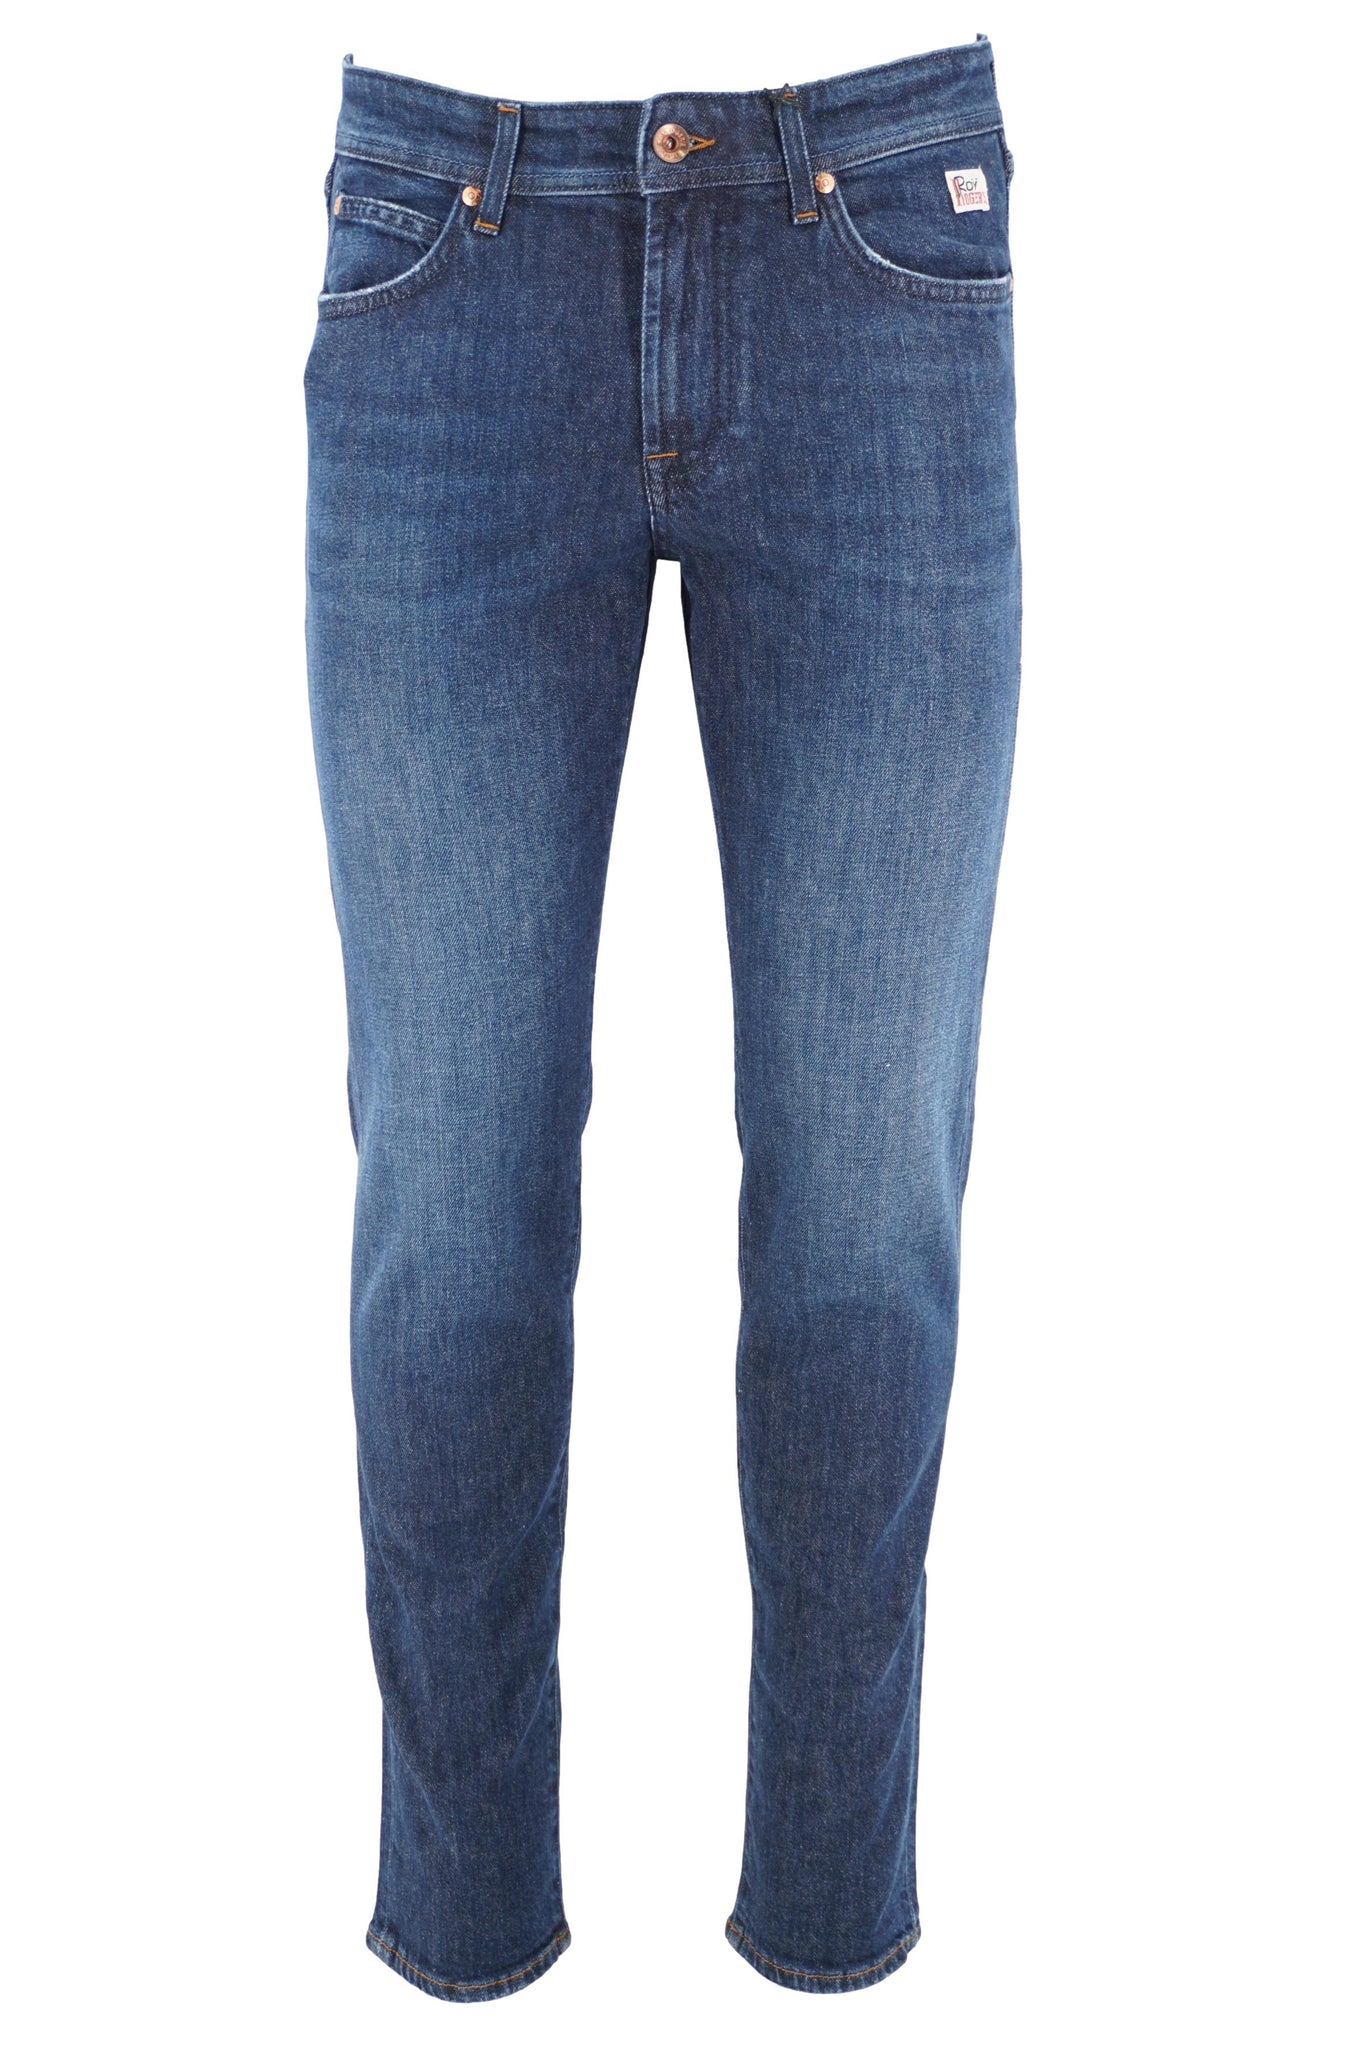 Jeans 517 Superior / Jeans - Ideal Moda